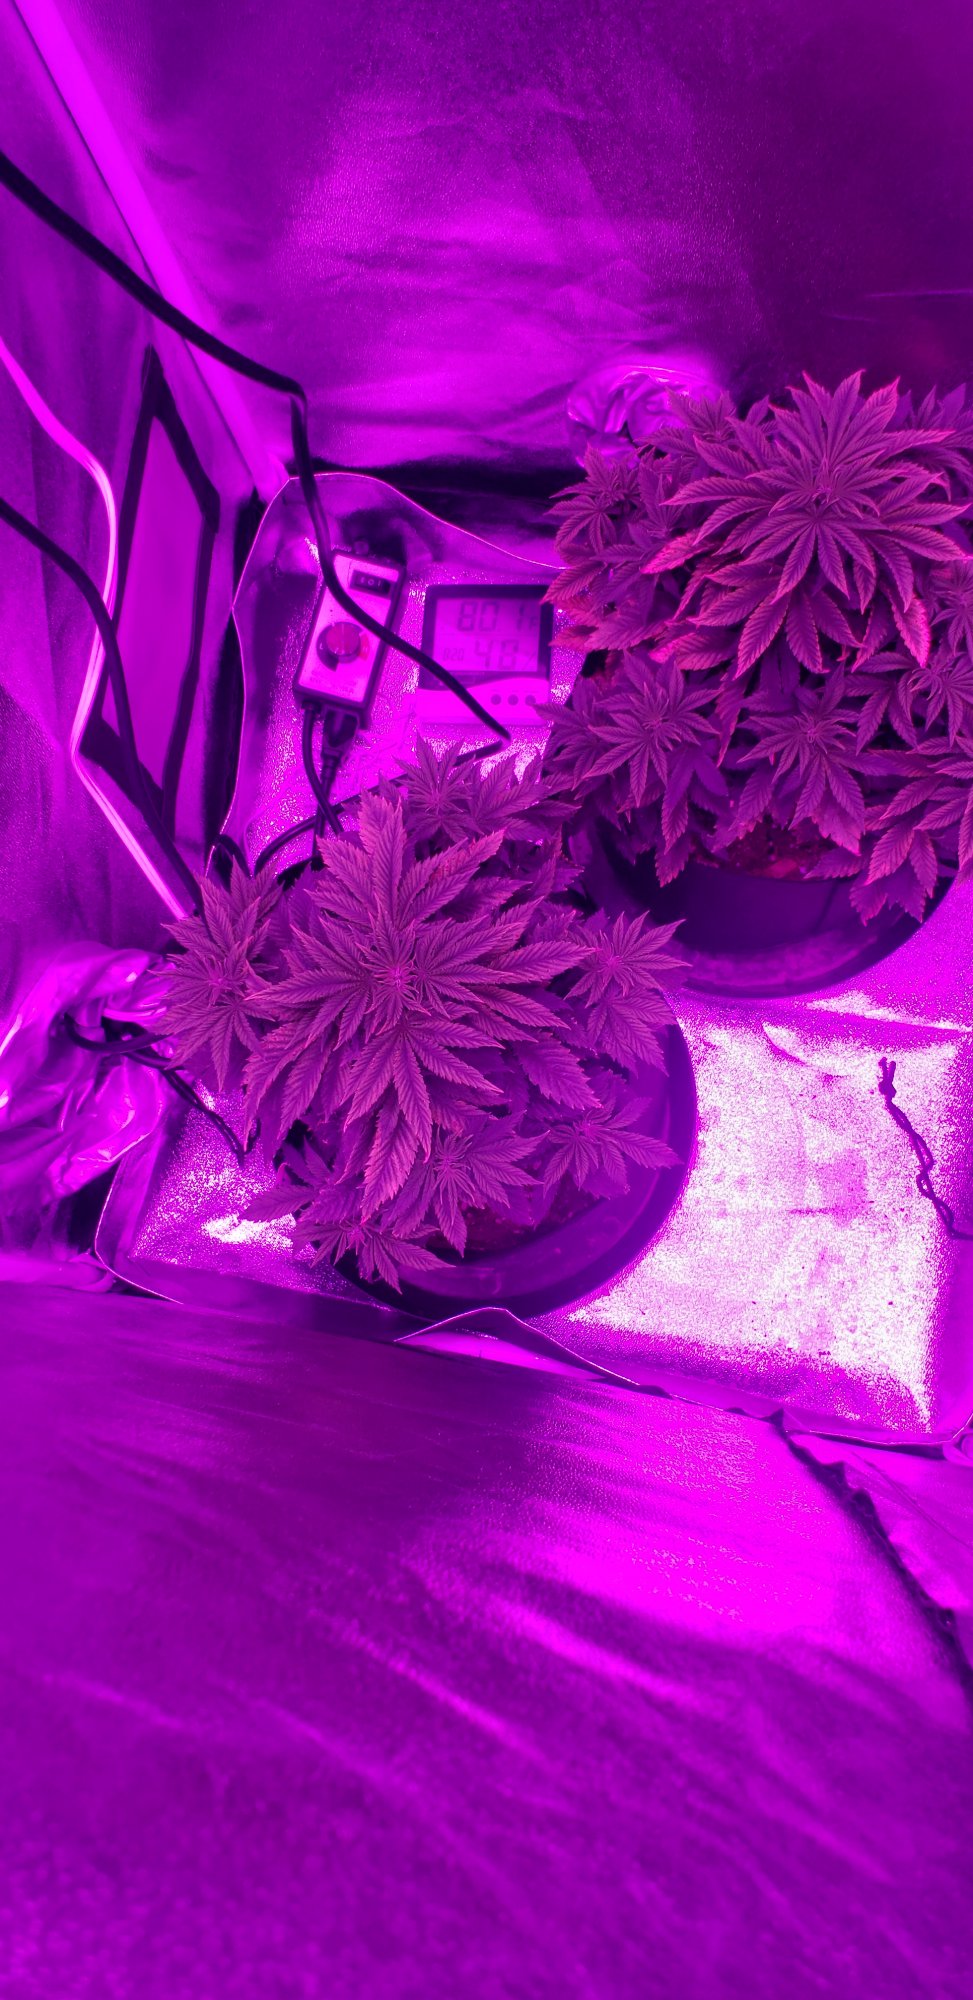 Help first time grower